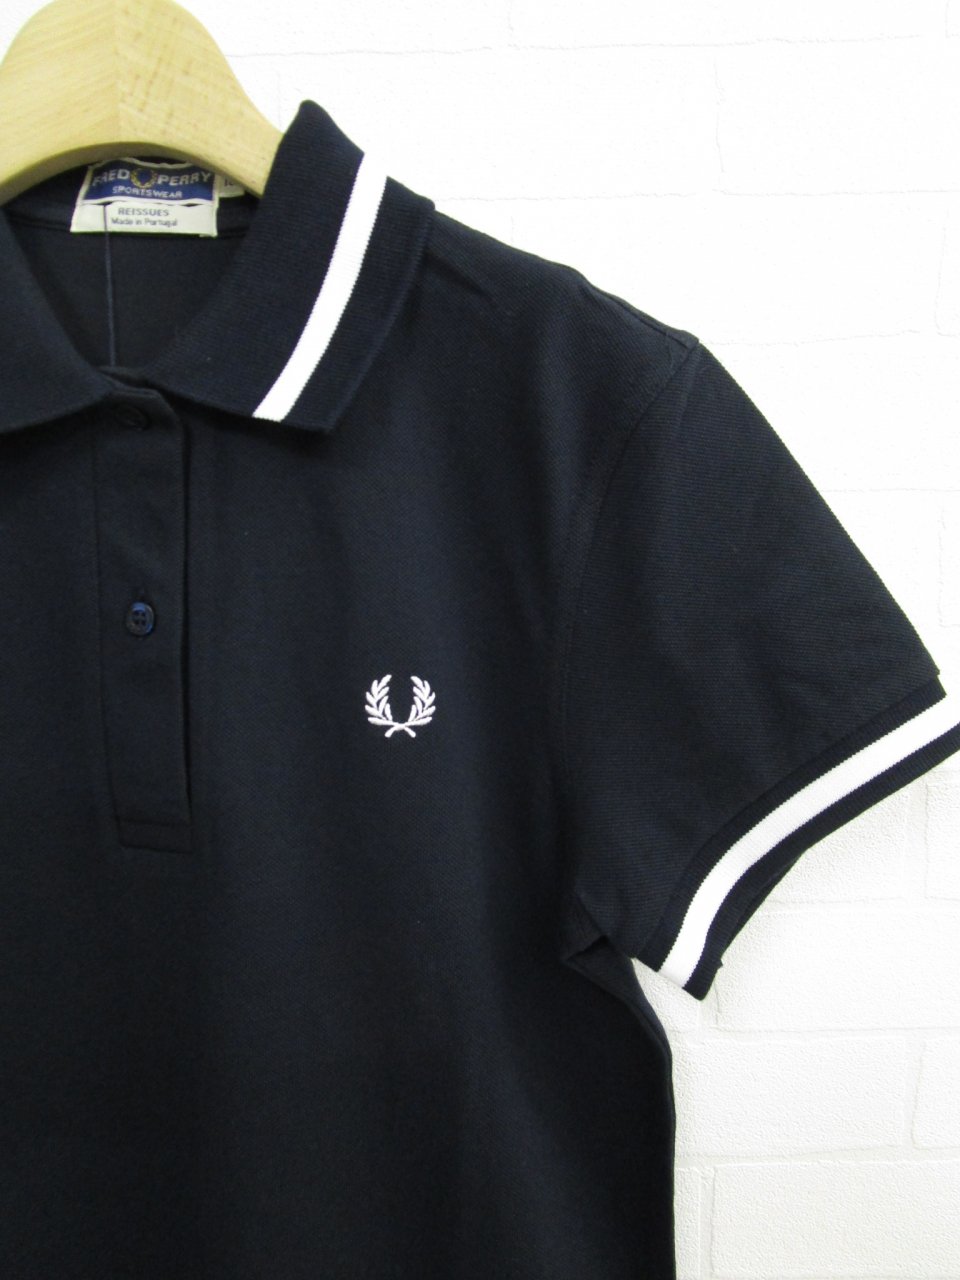 FRED PERRY - ポロシャツワンピース - Sheth Online Store - シス 